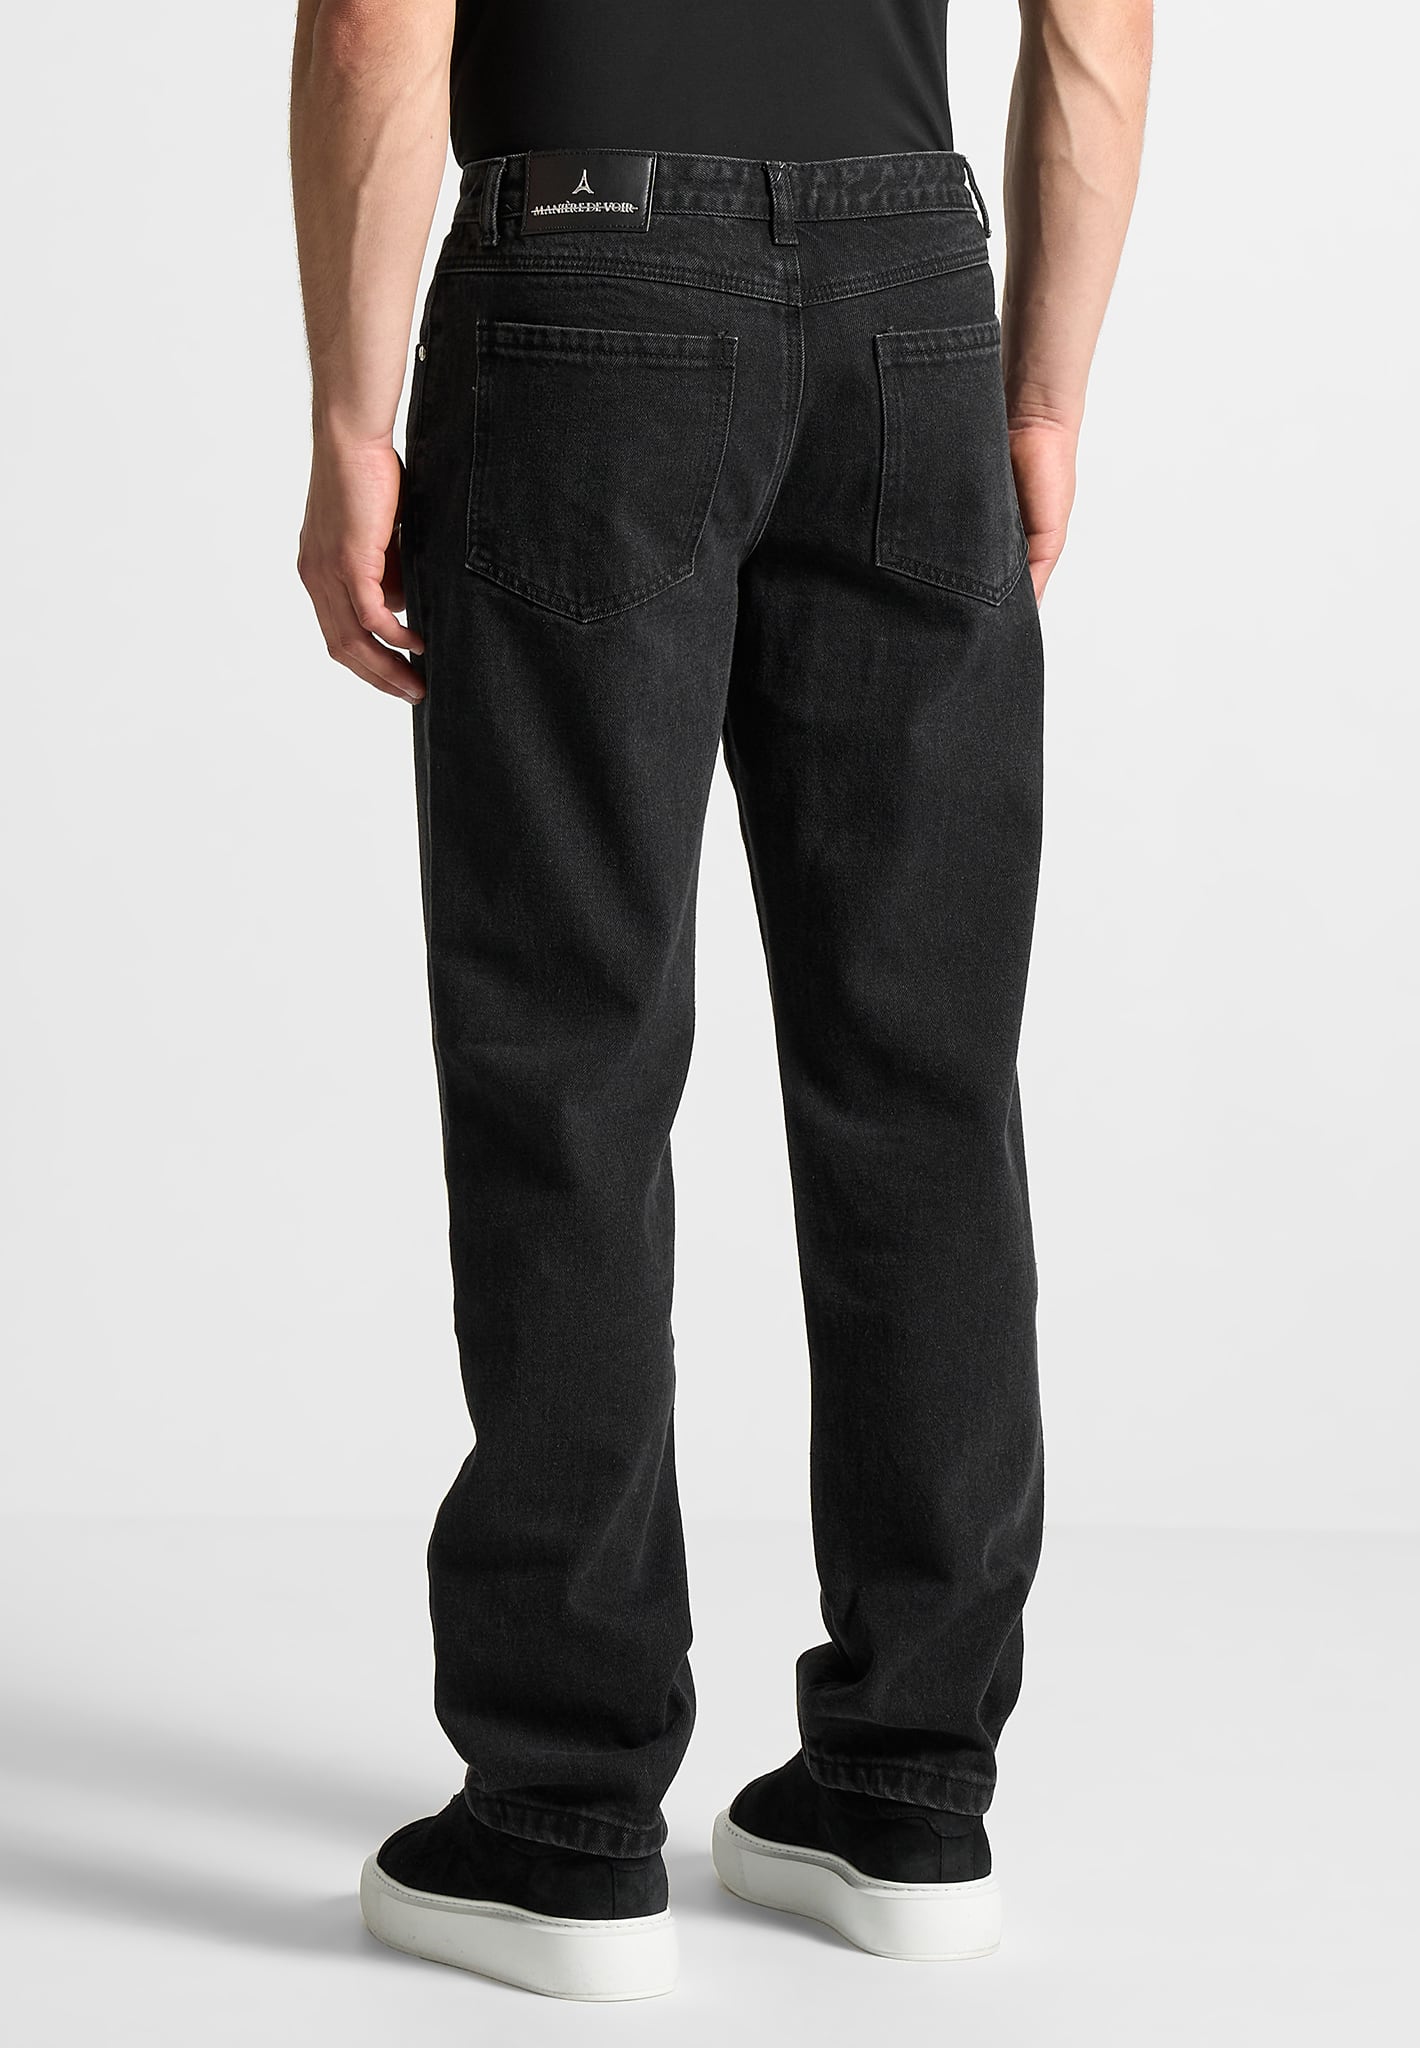 Relaxed Fit Jean - Washed Blue